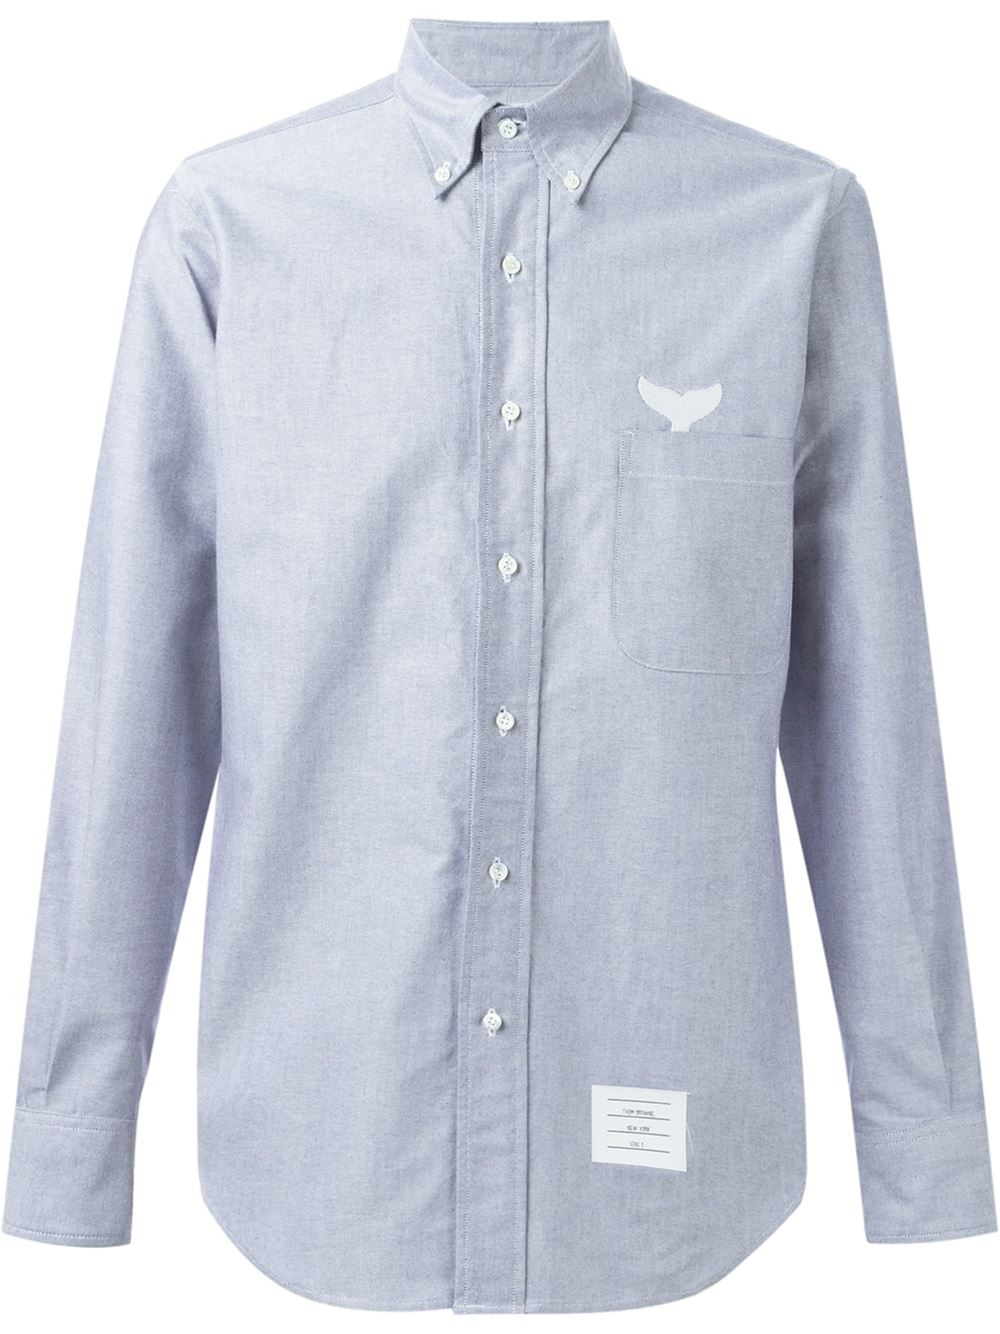 Thom browne Embroidered Whale Tail Shirt in Blue for Men | Lyst